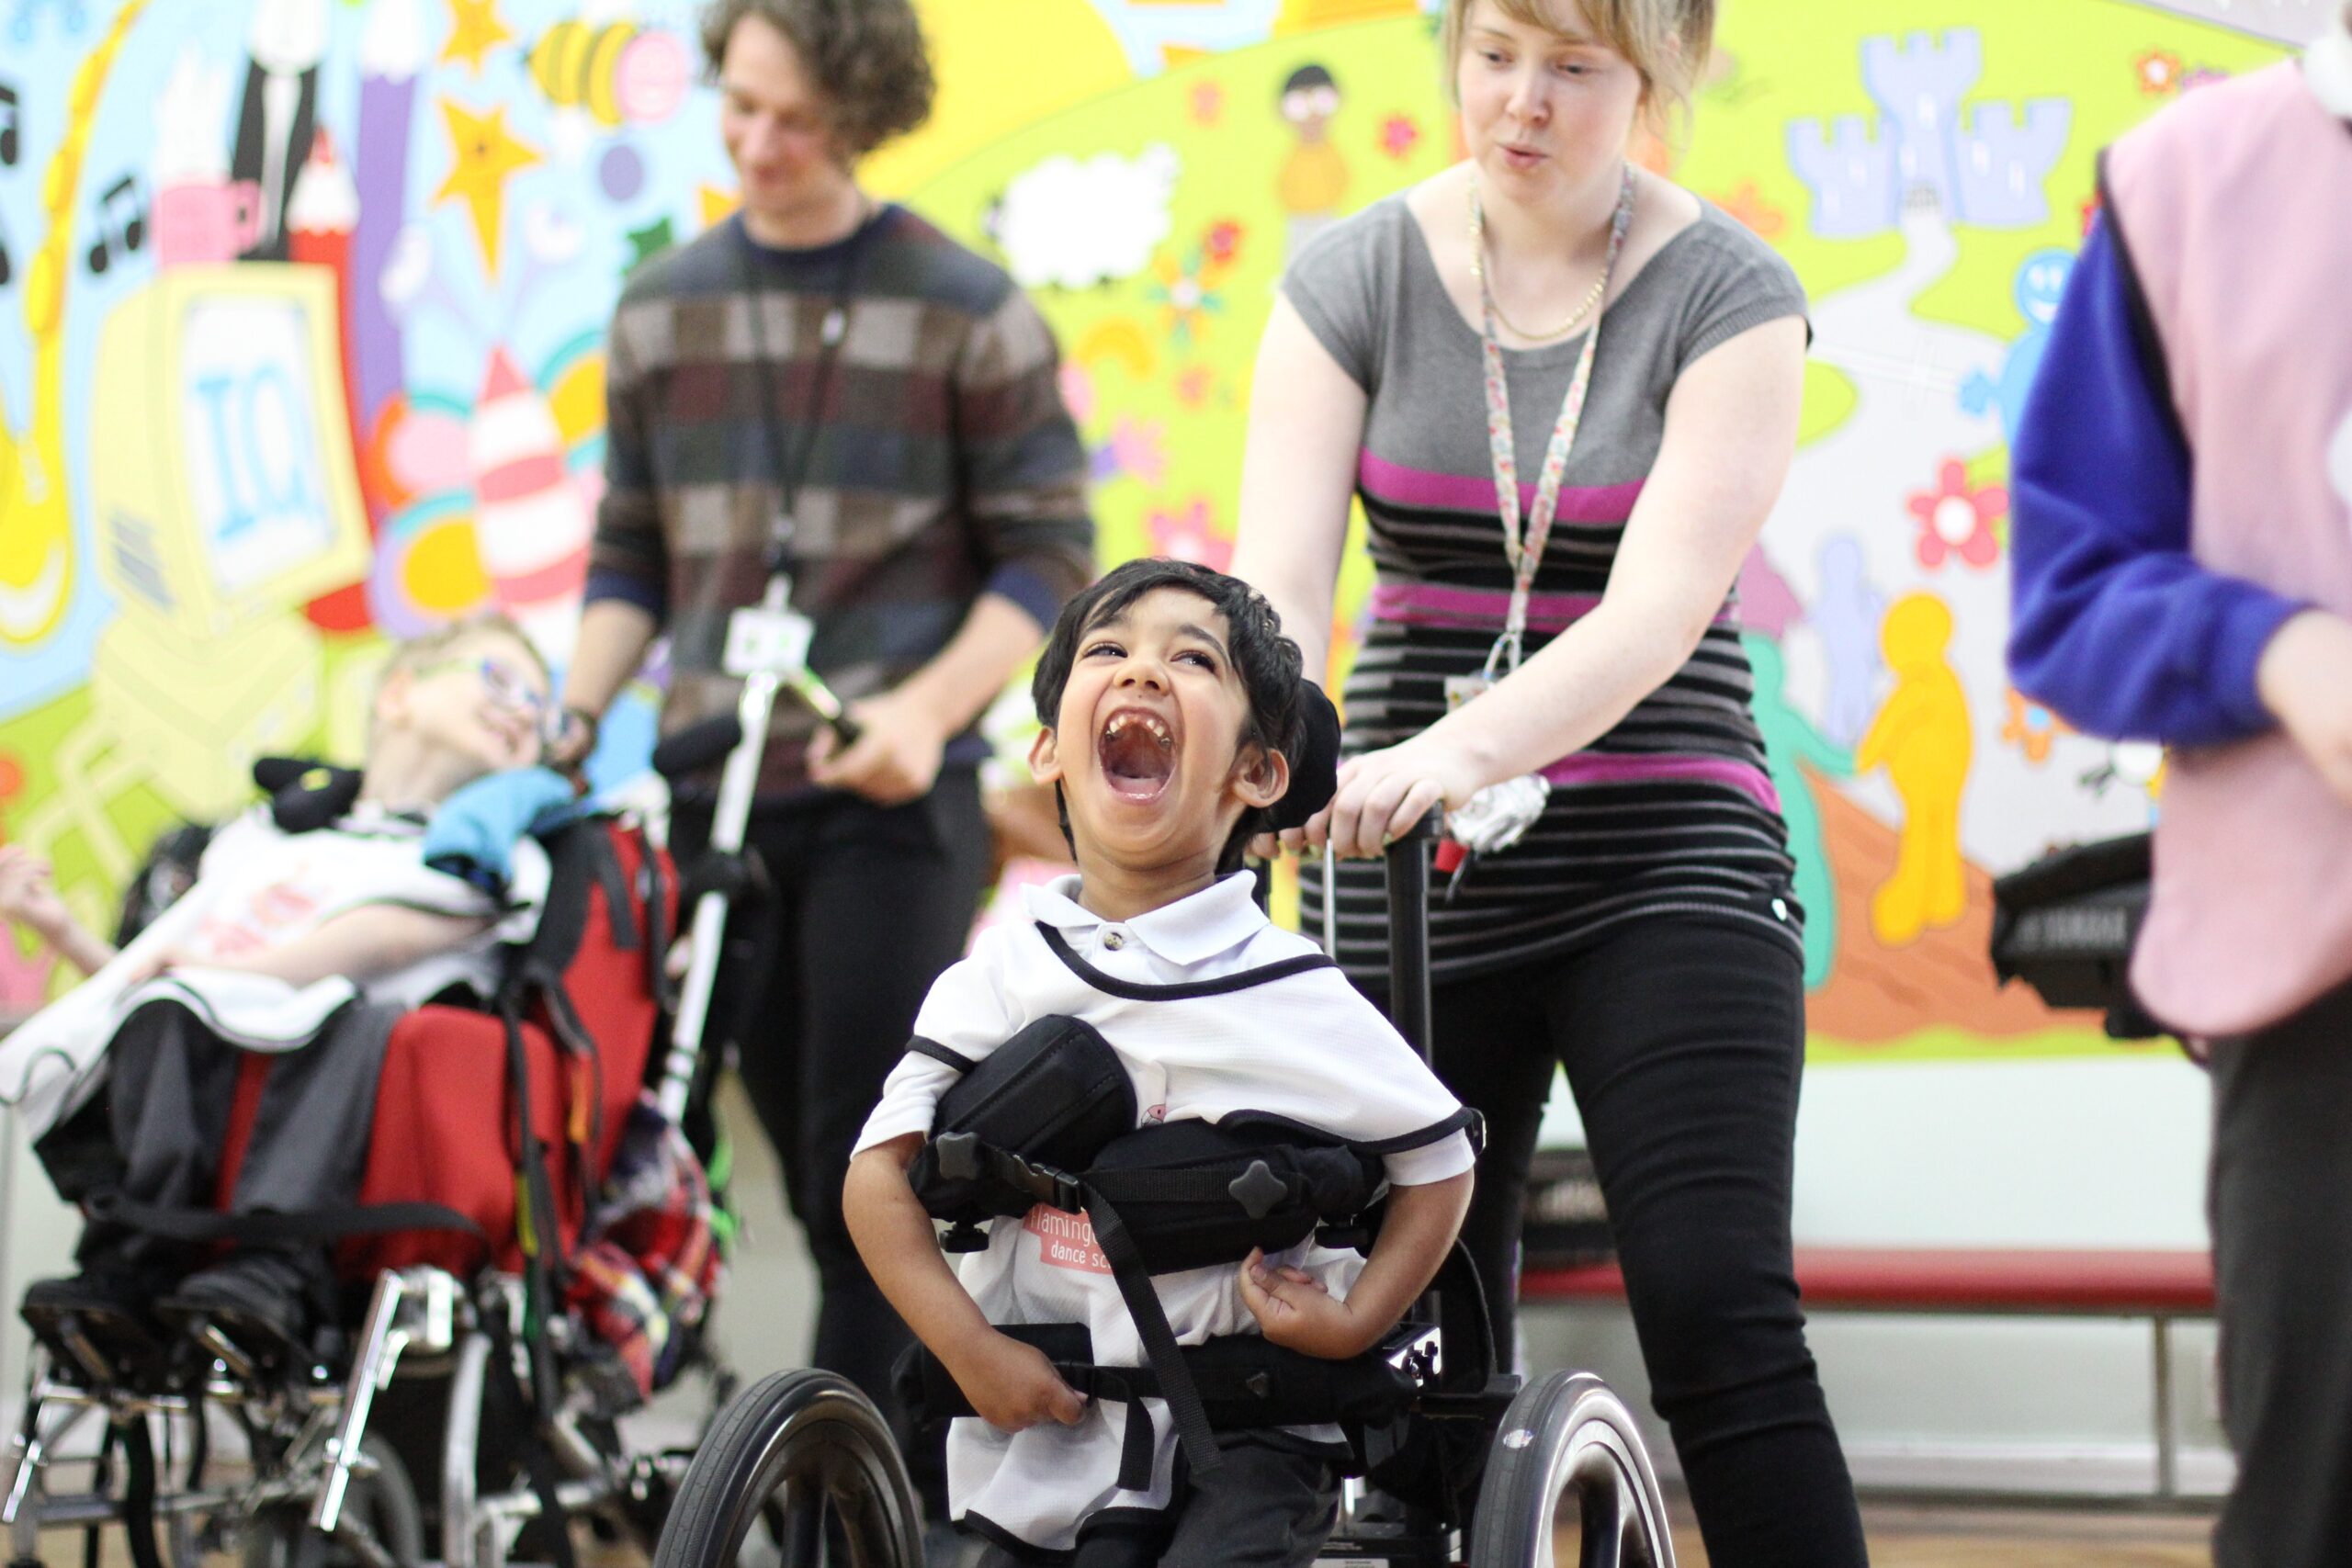 A young boy in a wheelchair gives a huge smile as he takes part in a Flamingo Chicks class, supported by his learning assistant